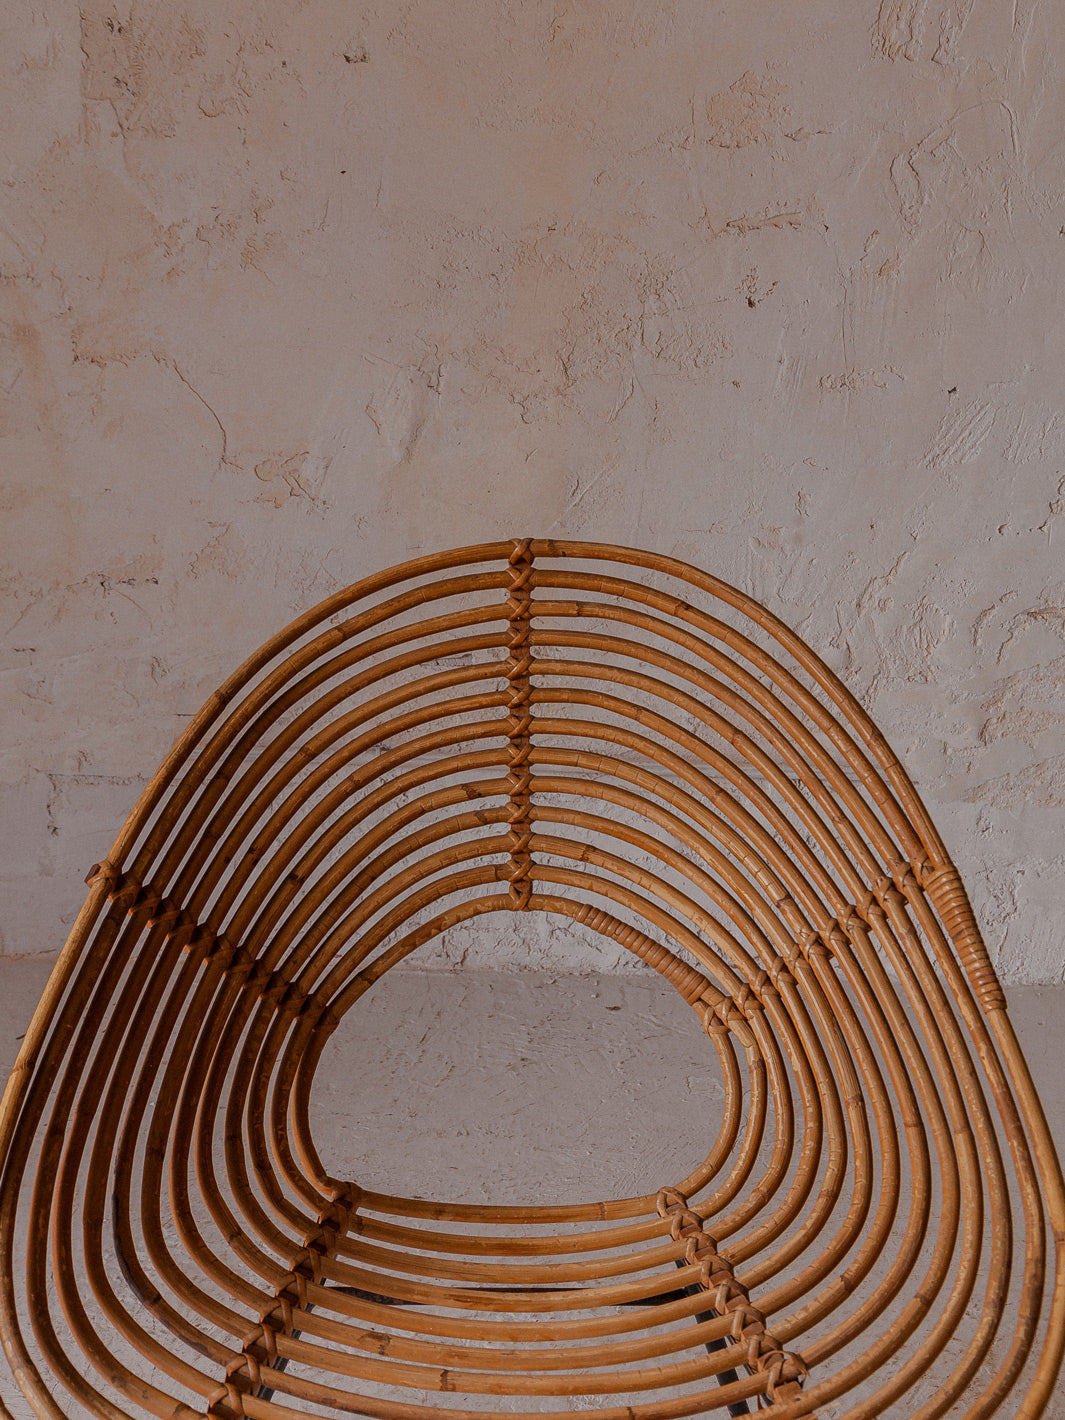 Italian bamboo armchair from the 60s